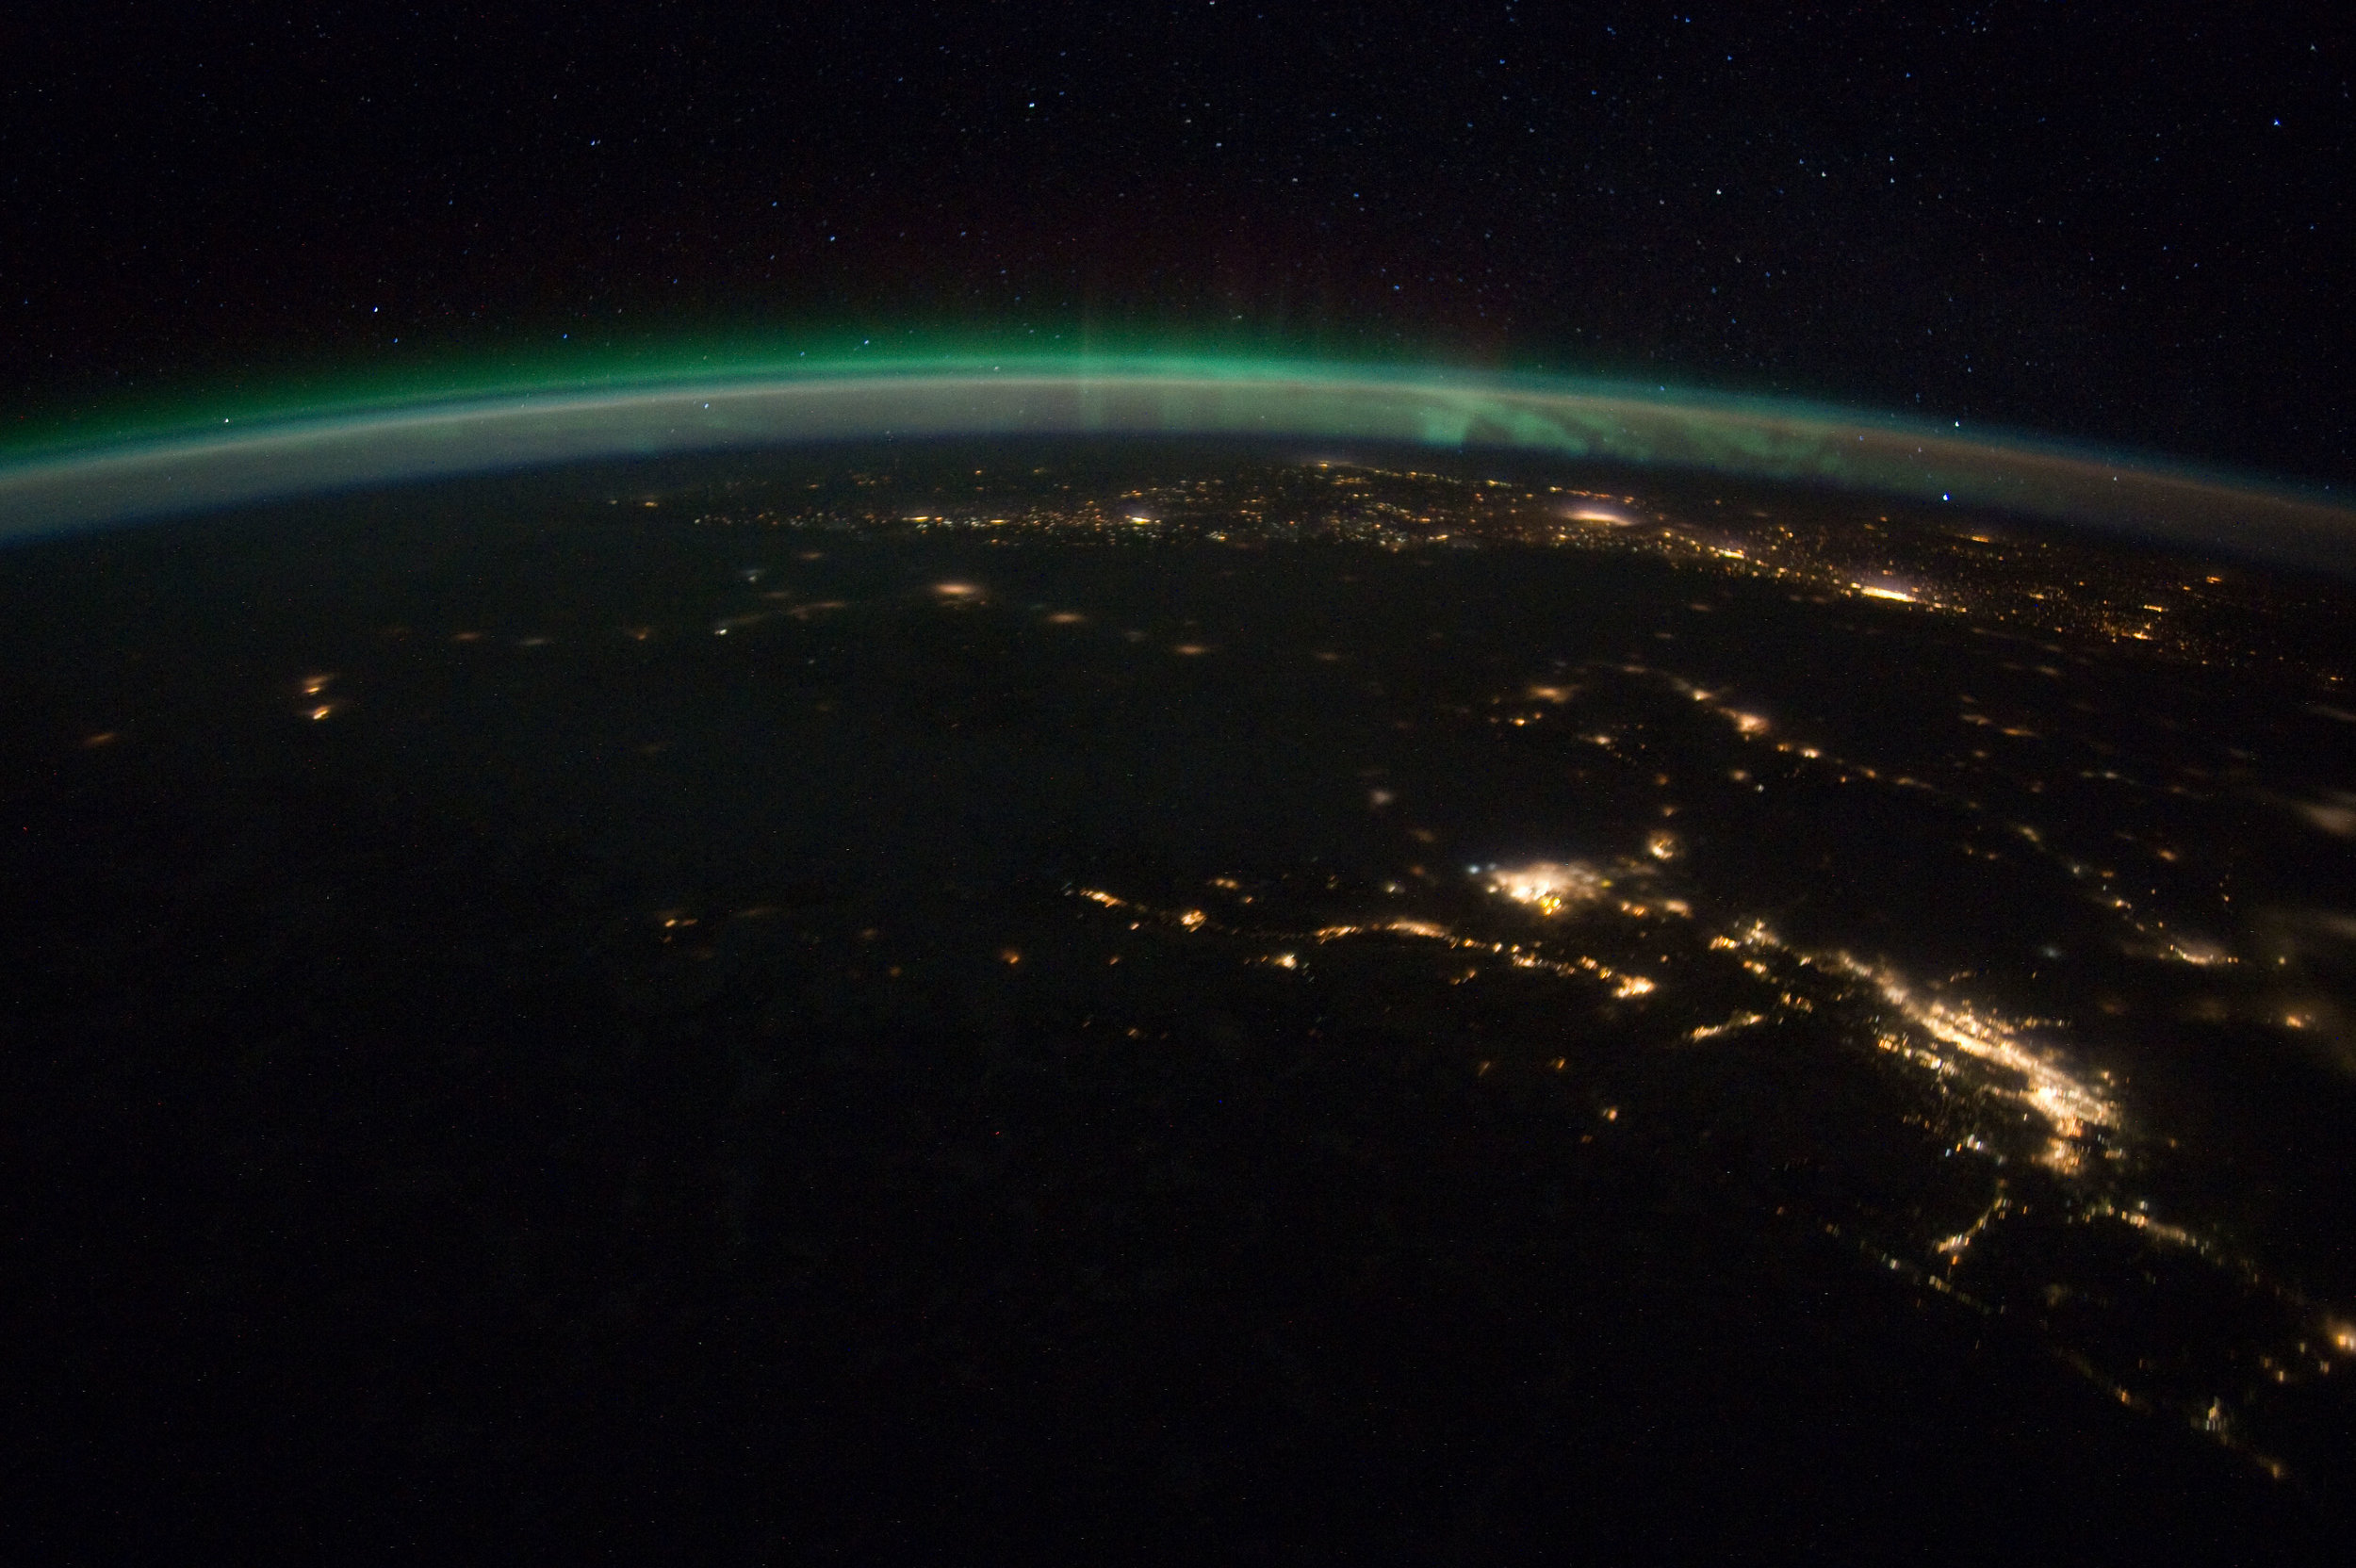 How Space Photography is Helping Fight Light Pollution